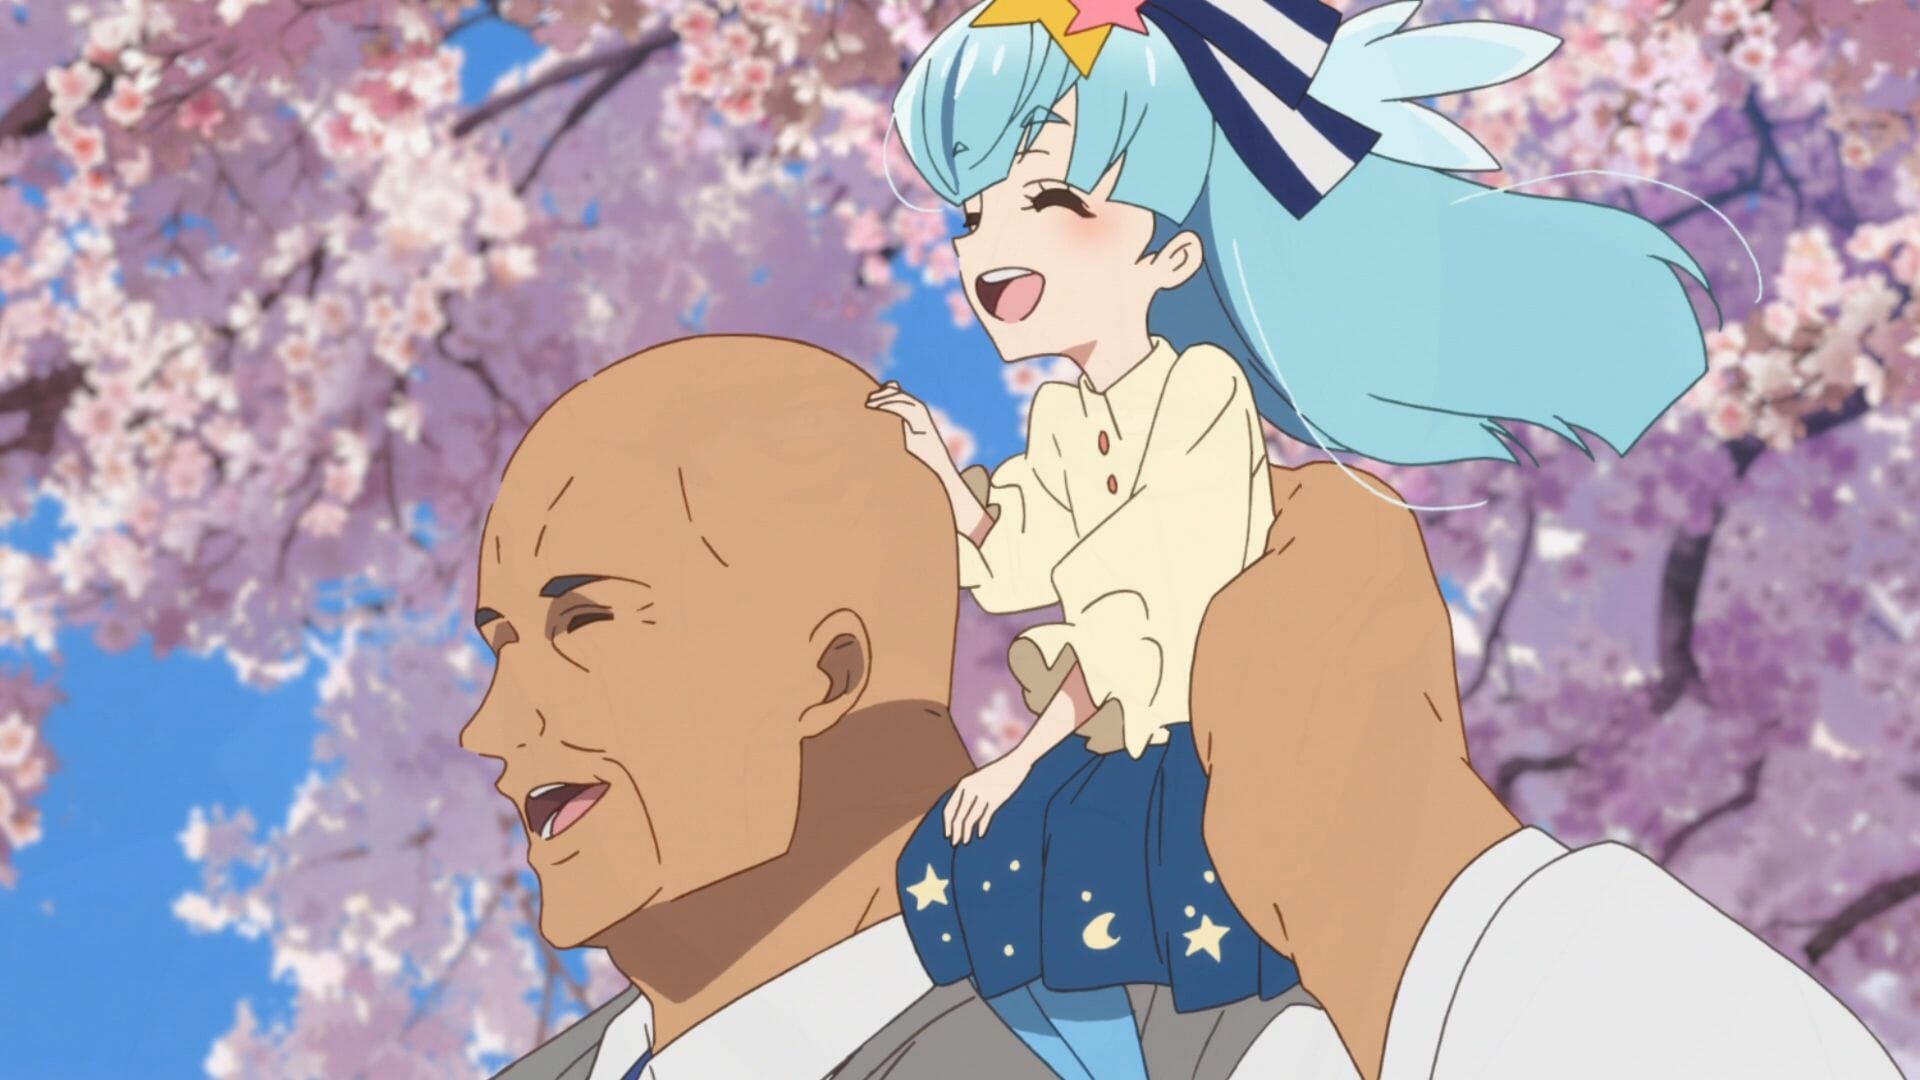 Still from Zombie Land Saga episode 8. A young blue-haired girl smiles happily as she sits on the shoulder of her father - a large bald man.